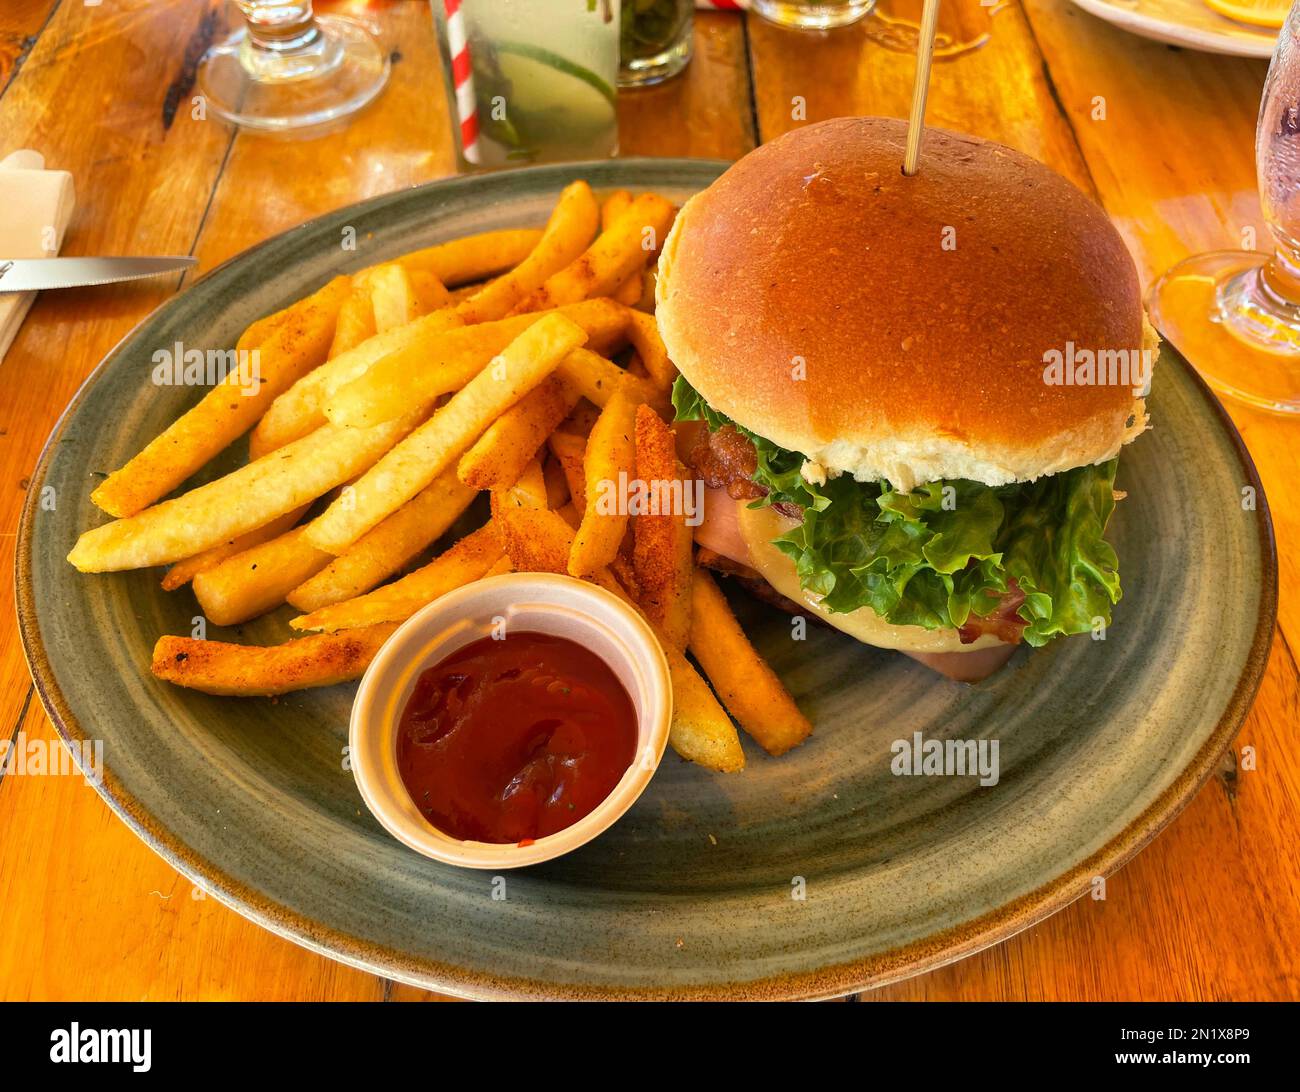 Close-up of  sandwich and fries a dish of ketchup, and a mojito. Stock Photo